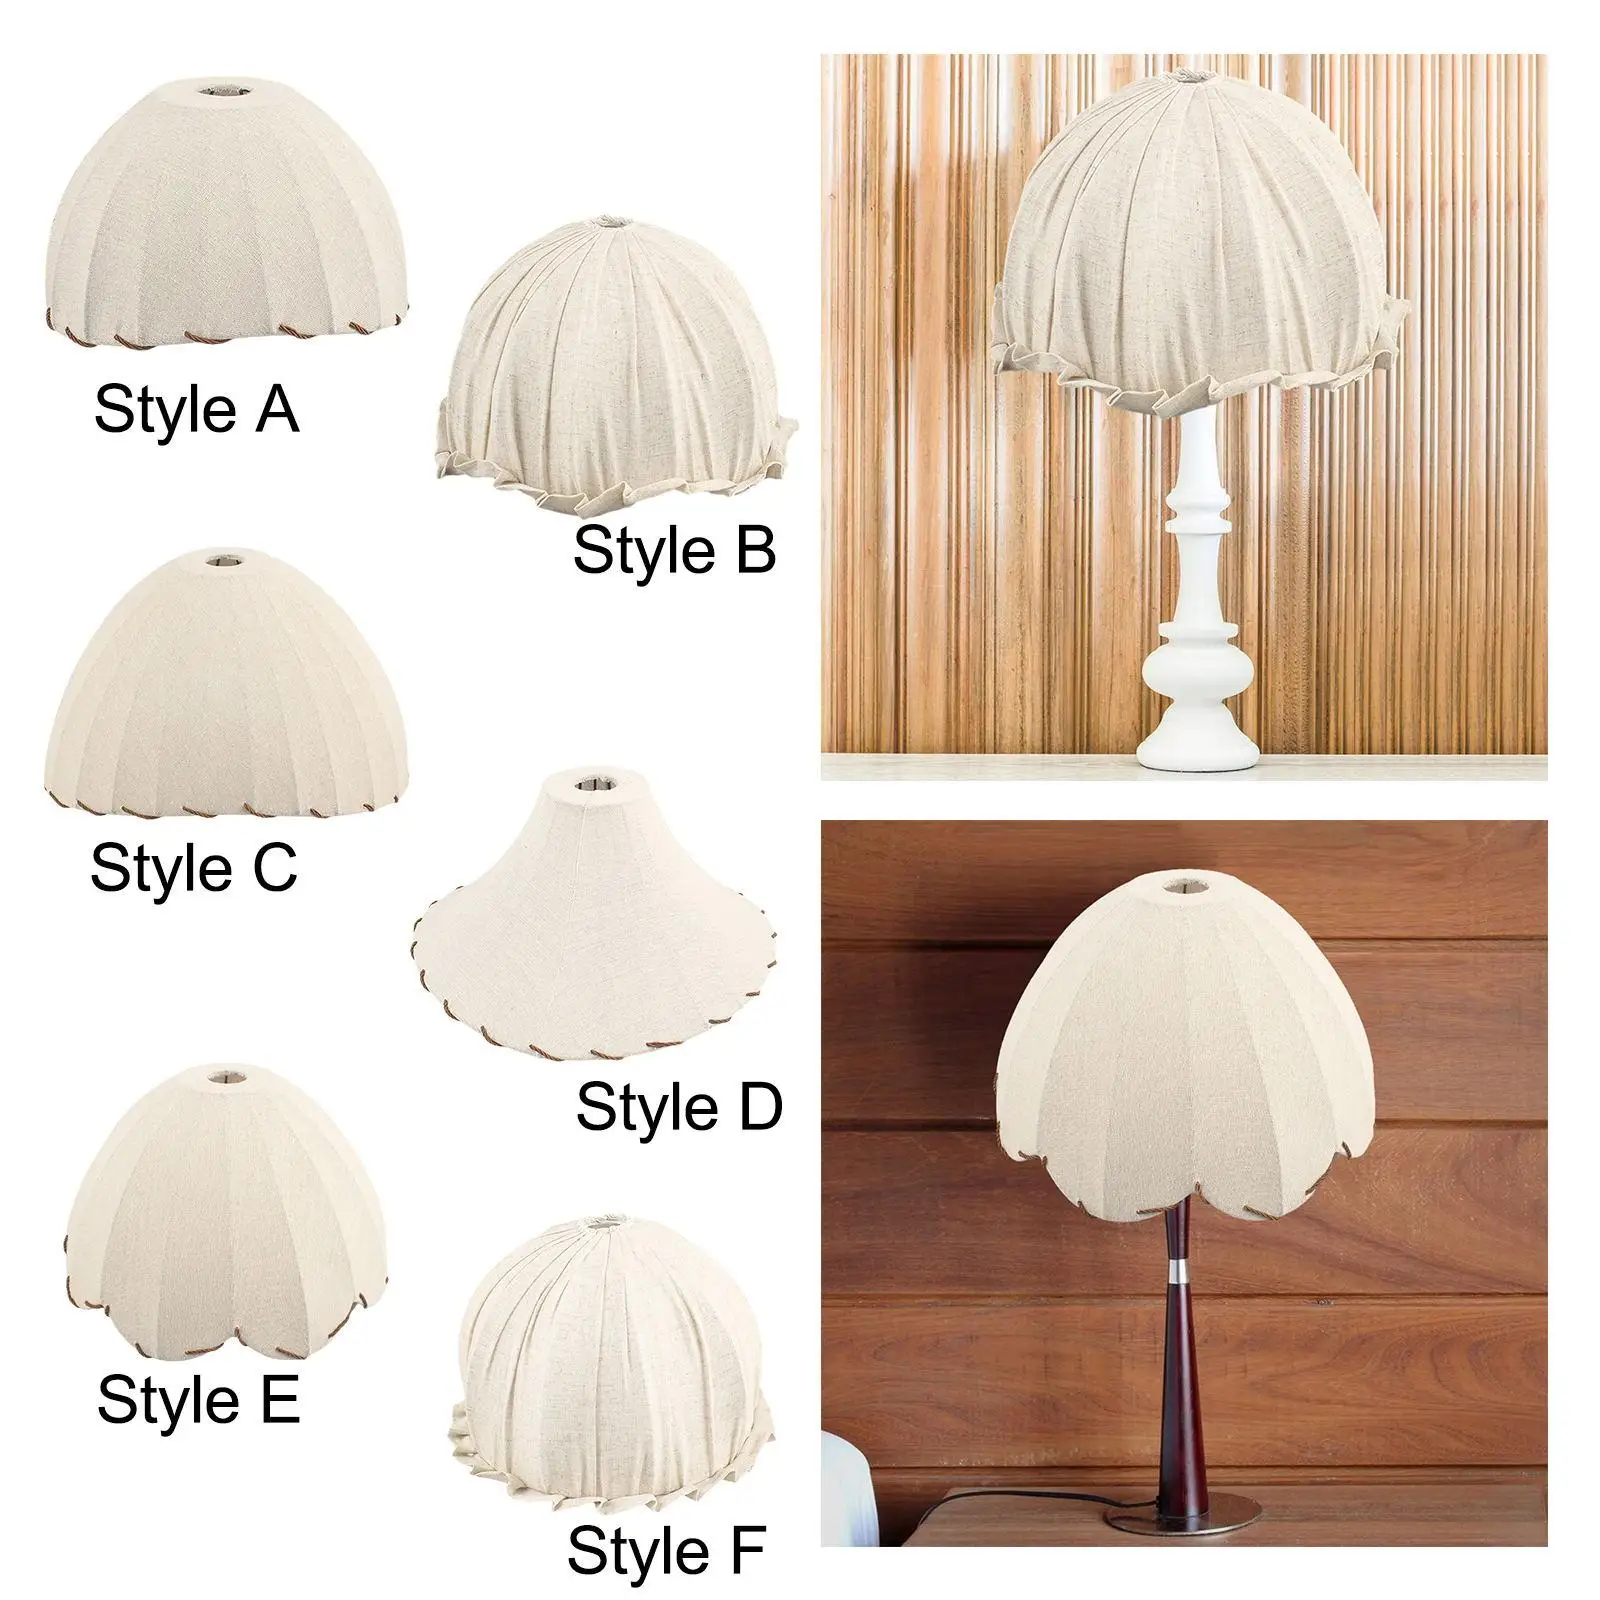 Floor Light Fixture Cover Decorative Modern Lightweight Table Lamp Shade for Hotel Dorm Study Room Apartment Home Decor